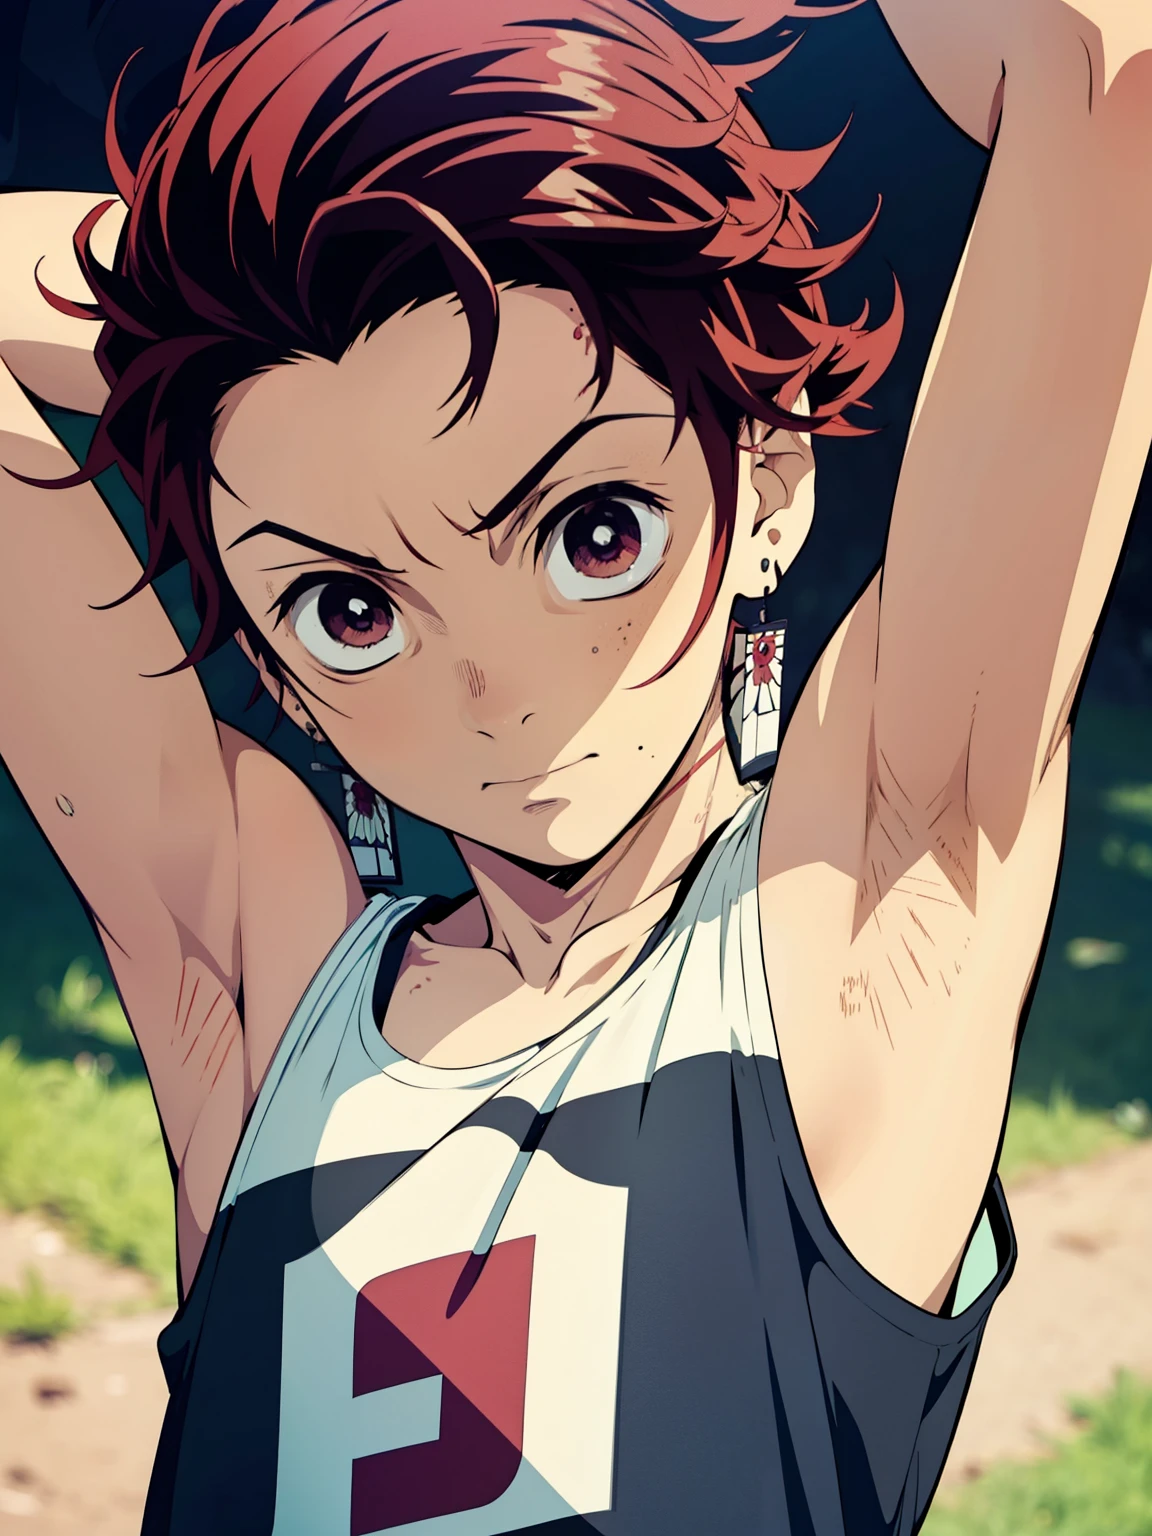 Anime style, Highres, Masterpiece, Best quality at best,High-quality illustrations, Best Quality,hight quality, hight detailed, realistic, 1boy,Little Boy, Tanjiro, Red hair, Earring, hansome boy, cute face, adorable boy, Simple beckground, Cheerful boy, Tank top, Body, (showing armpit:1.3), Smooth armpit, boy focus, Uhd, 4k